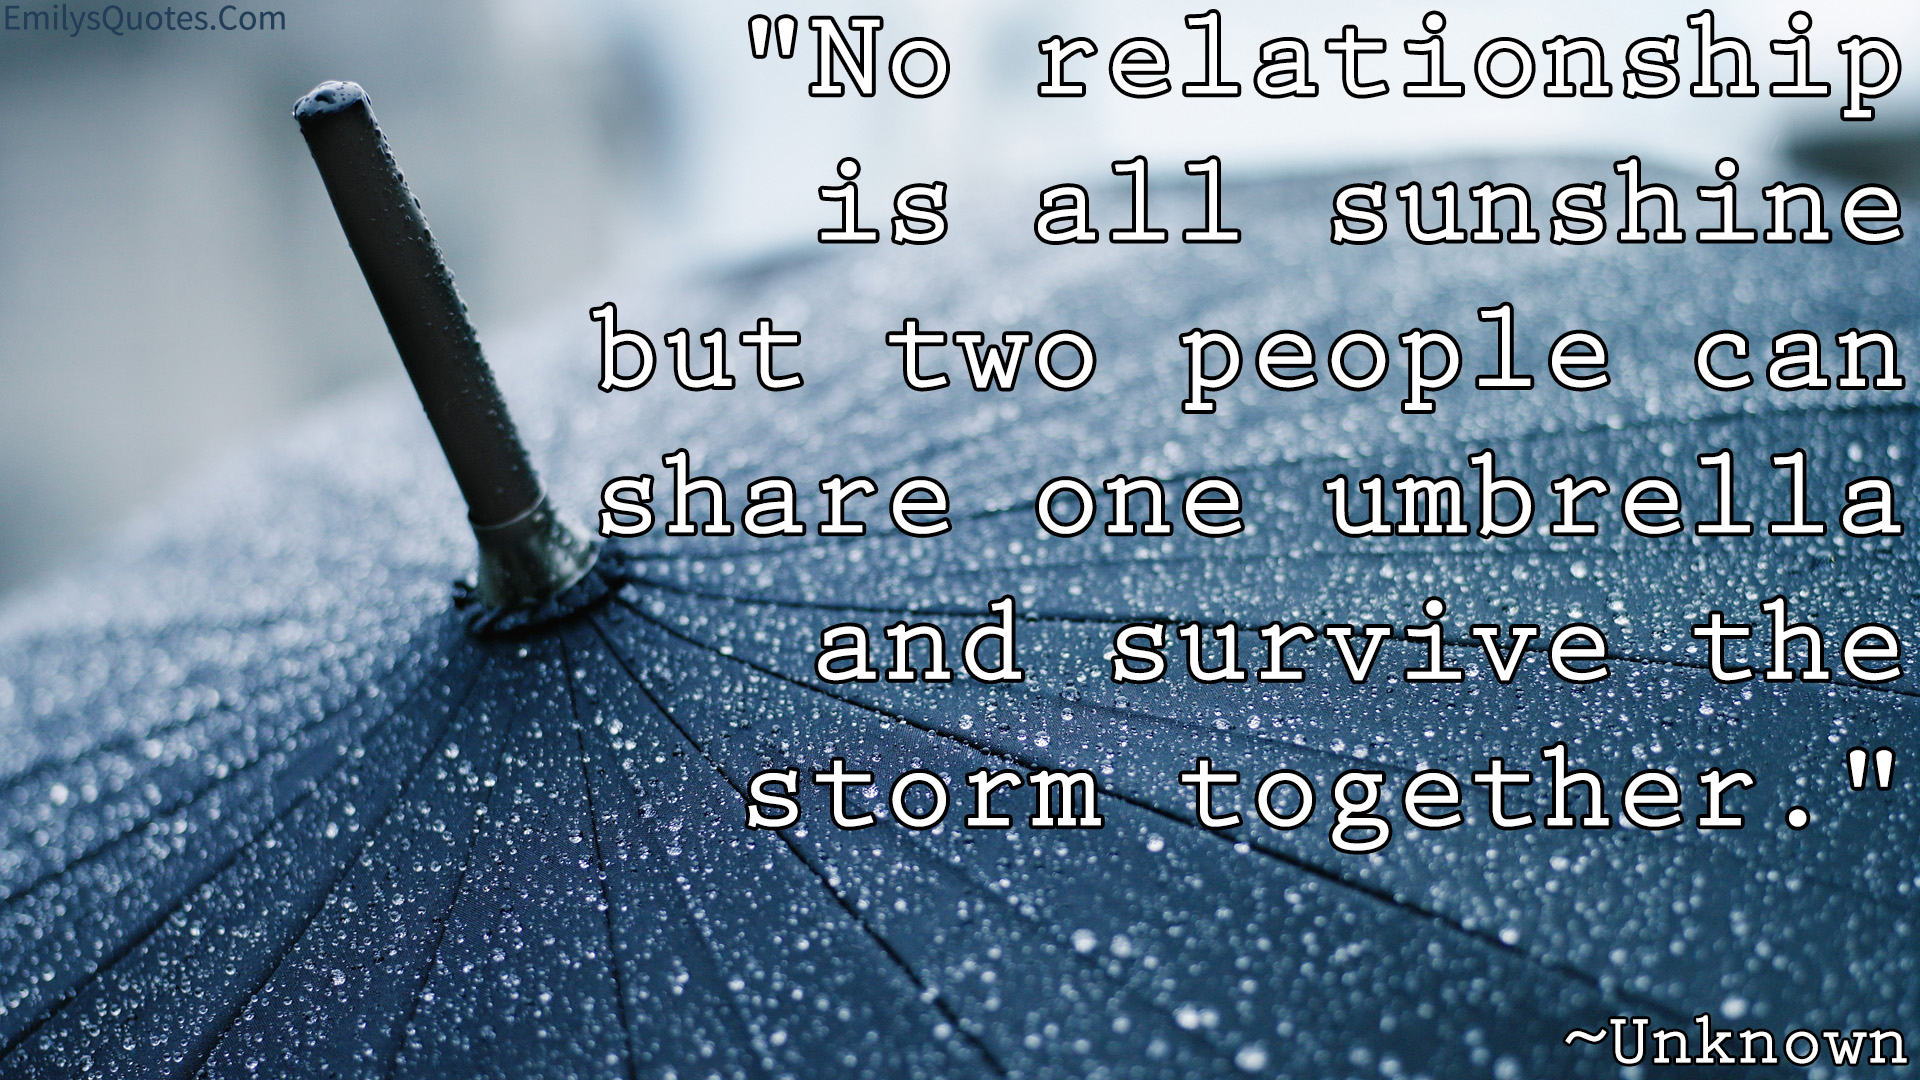 No relationship is all sunshine but two people can share one umbrella